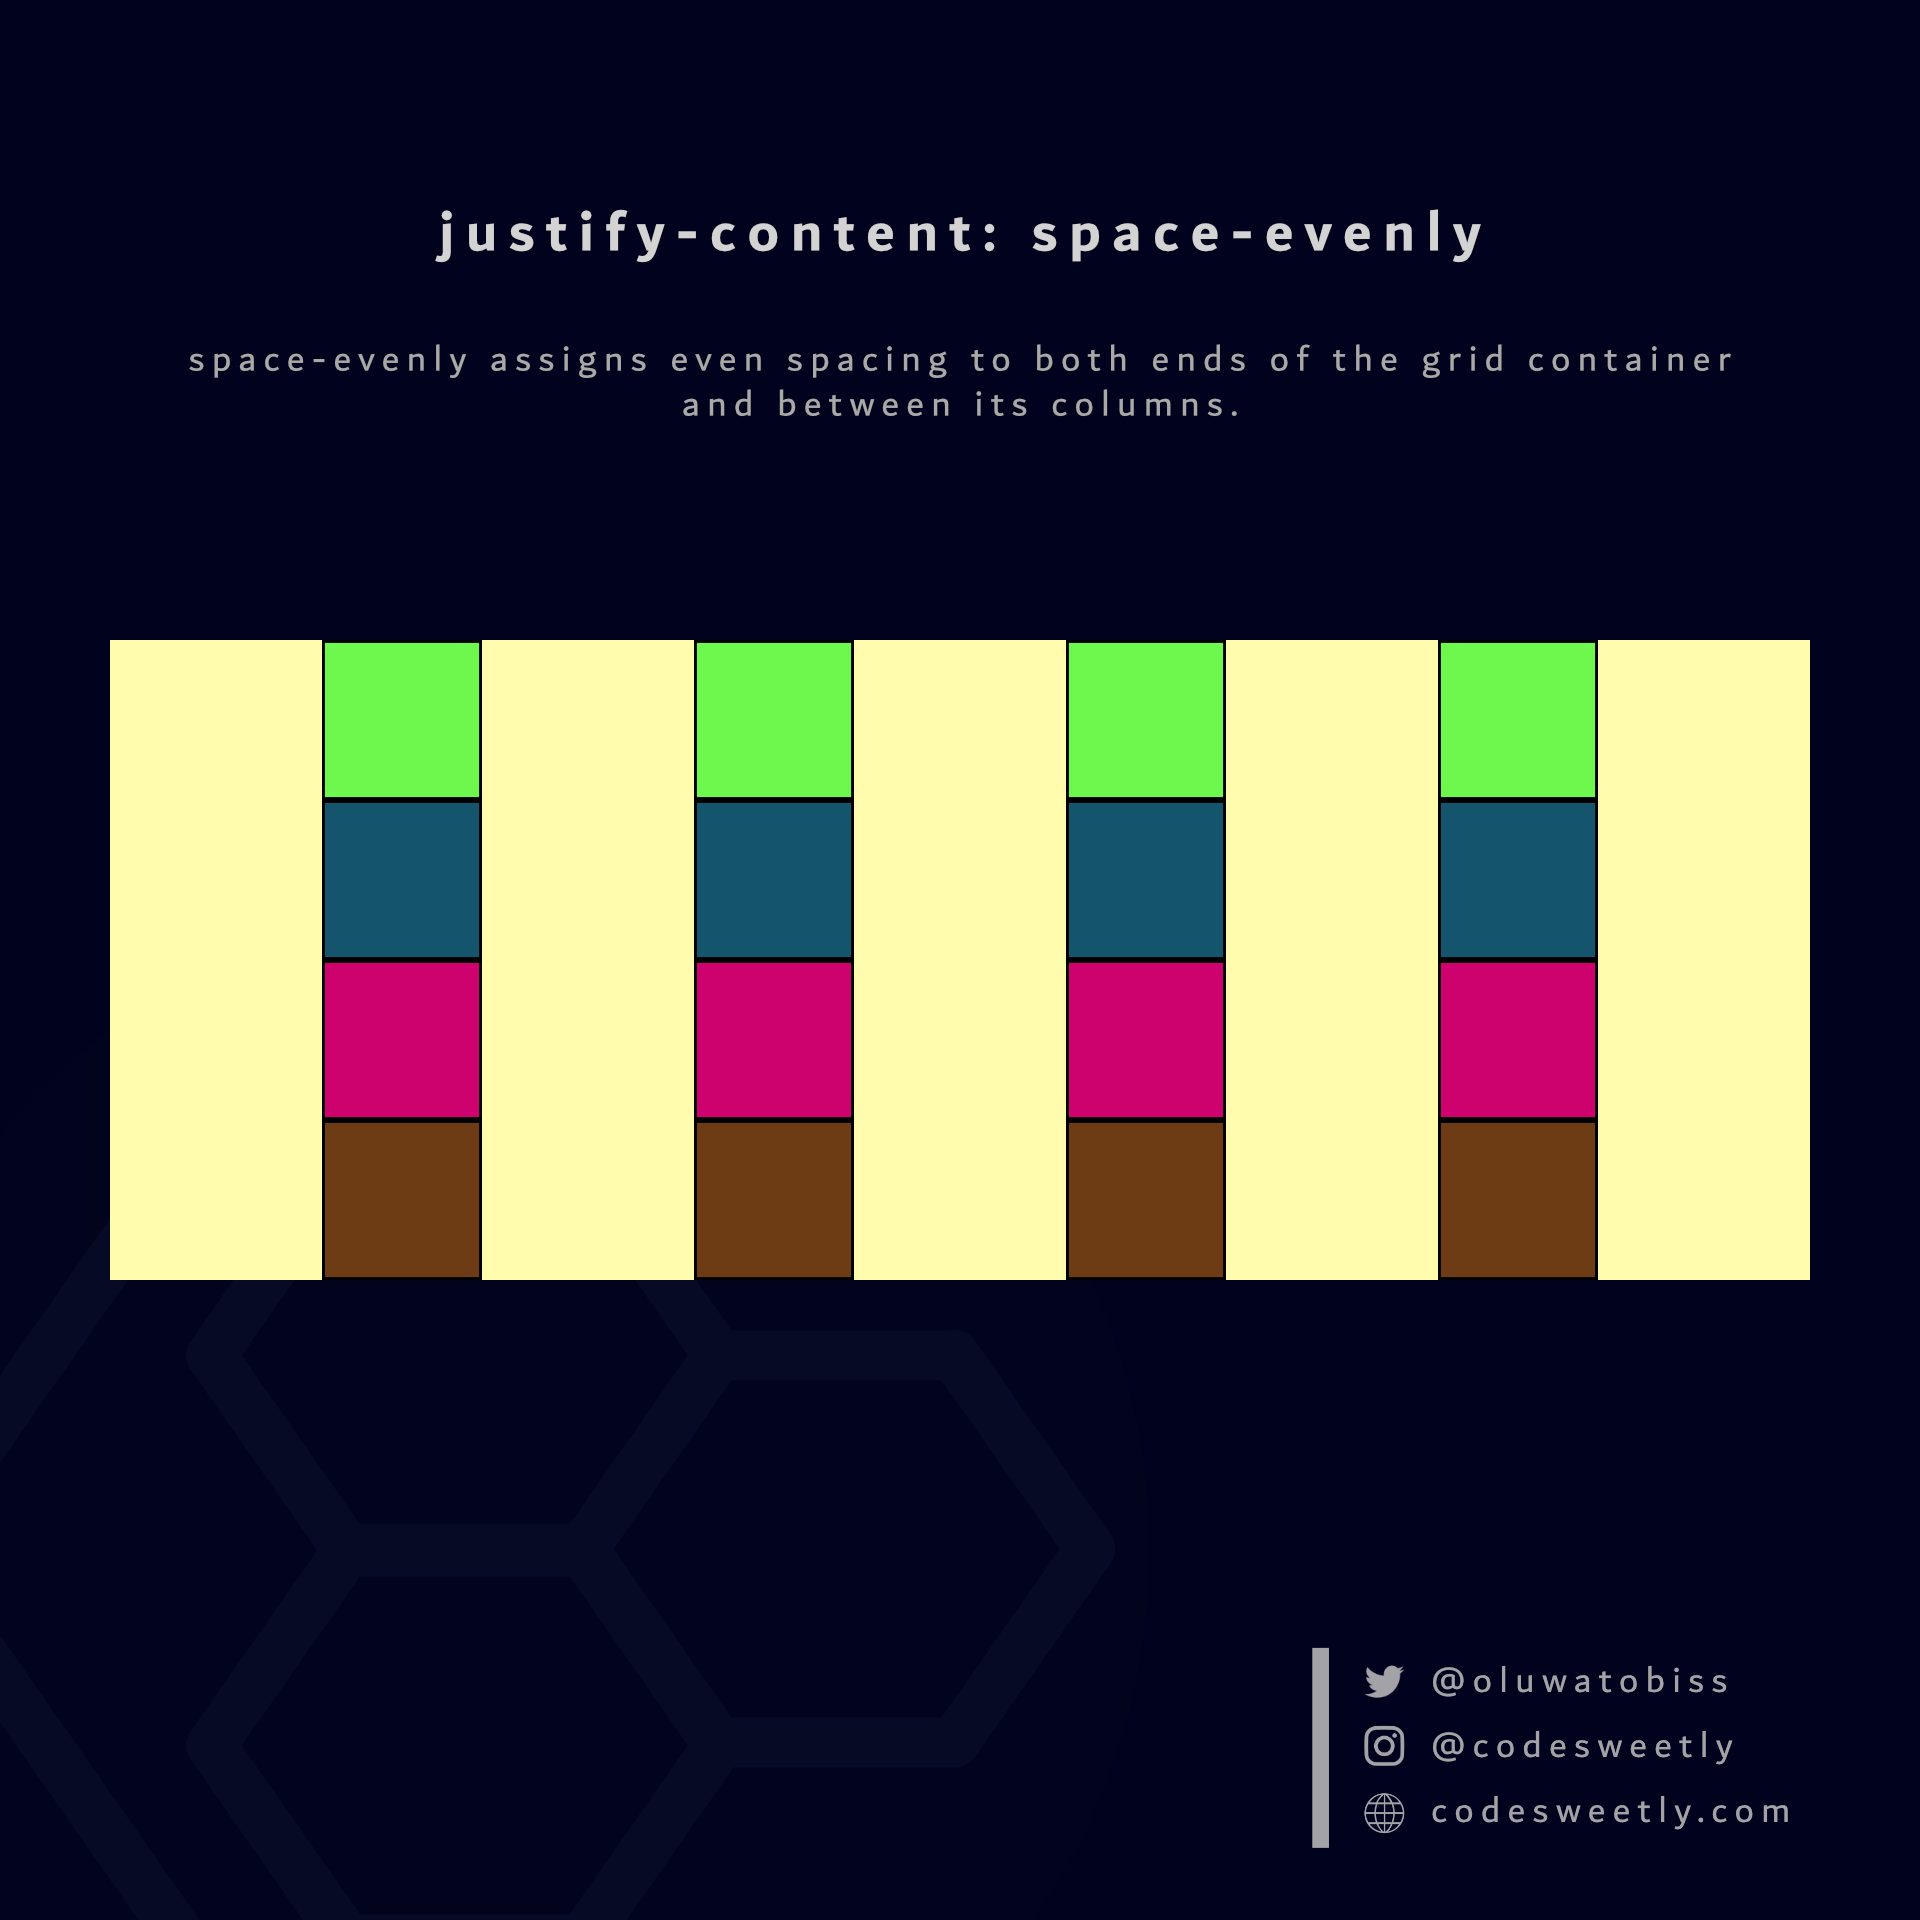 Illustration of justify-content&#39;s space-evenly value in CSS Grid